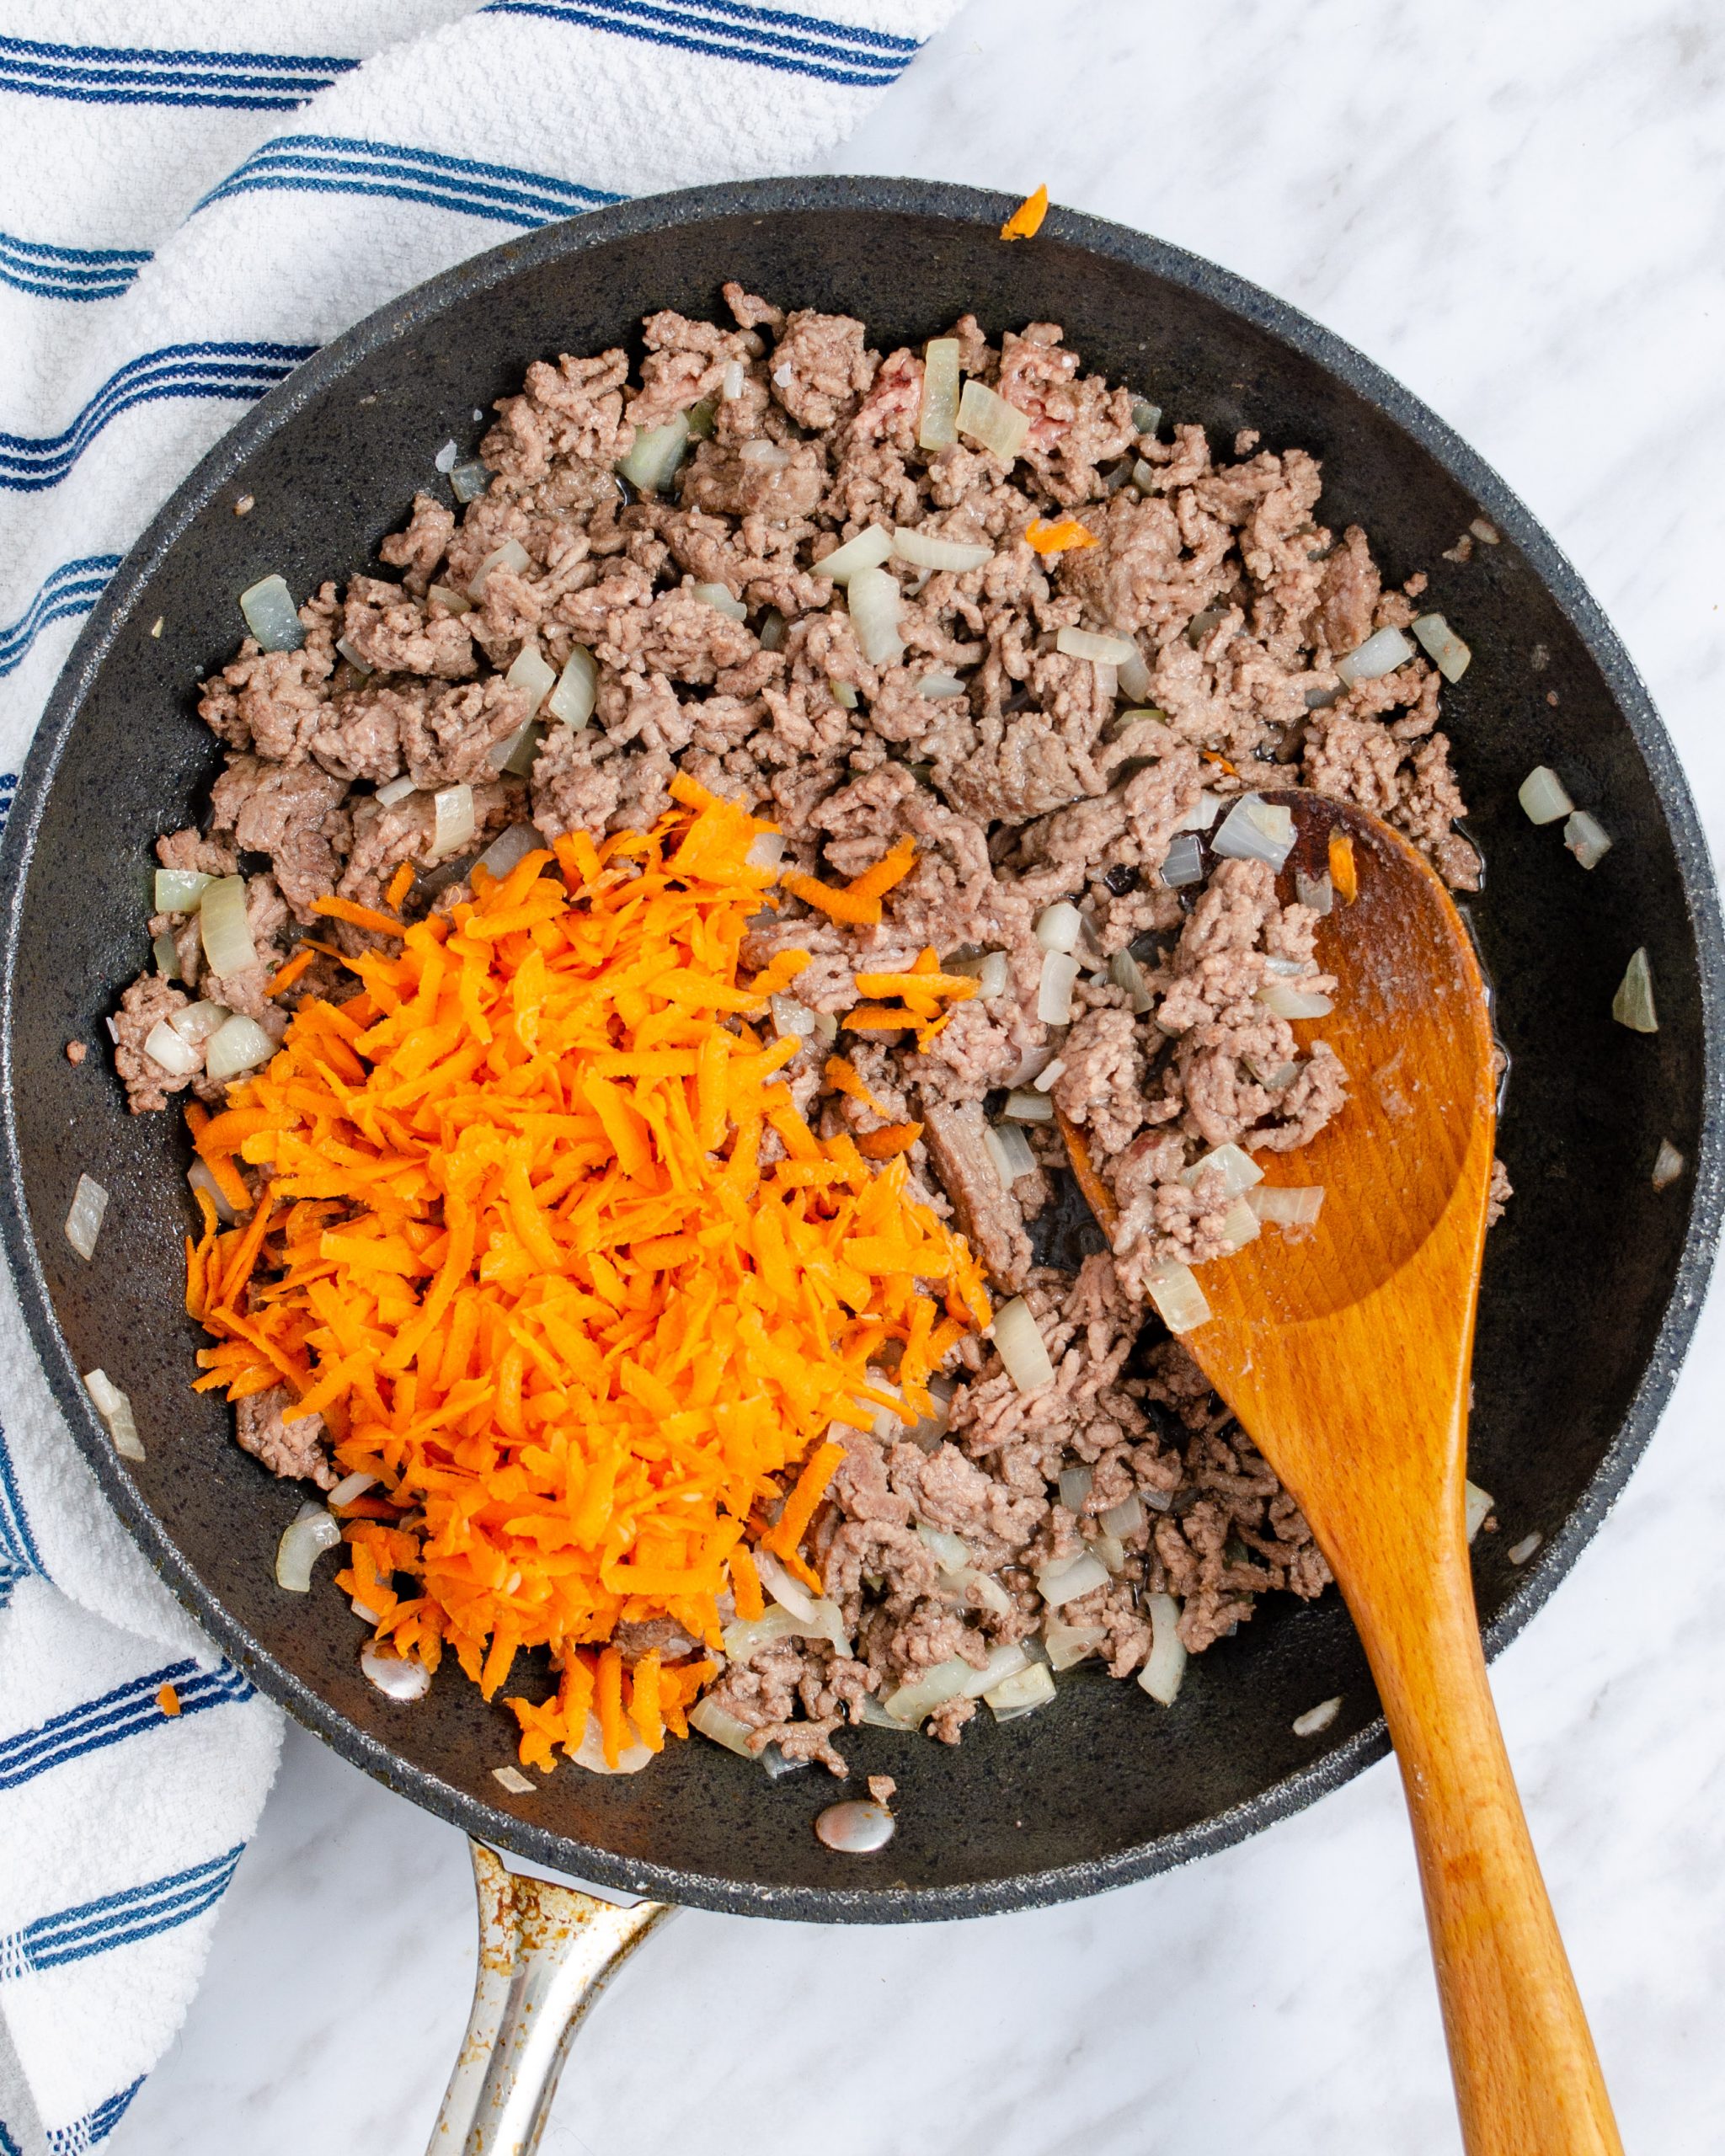 When the meat is halfway browned, mix the shredded carrots into the skillet.